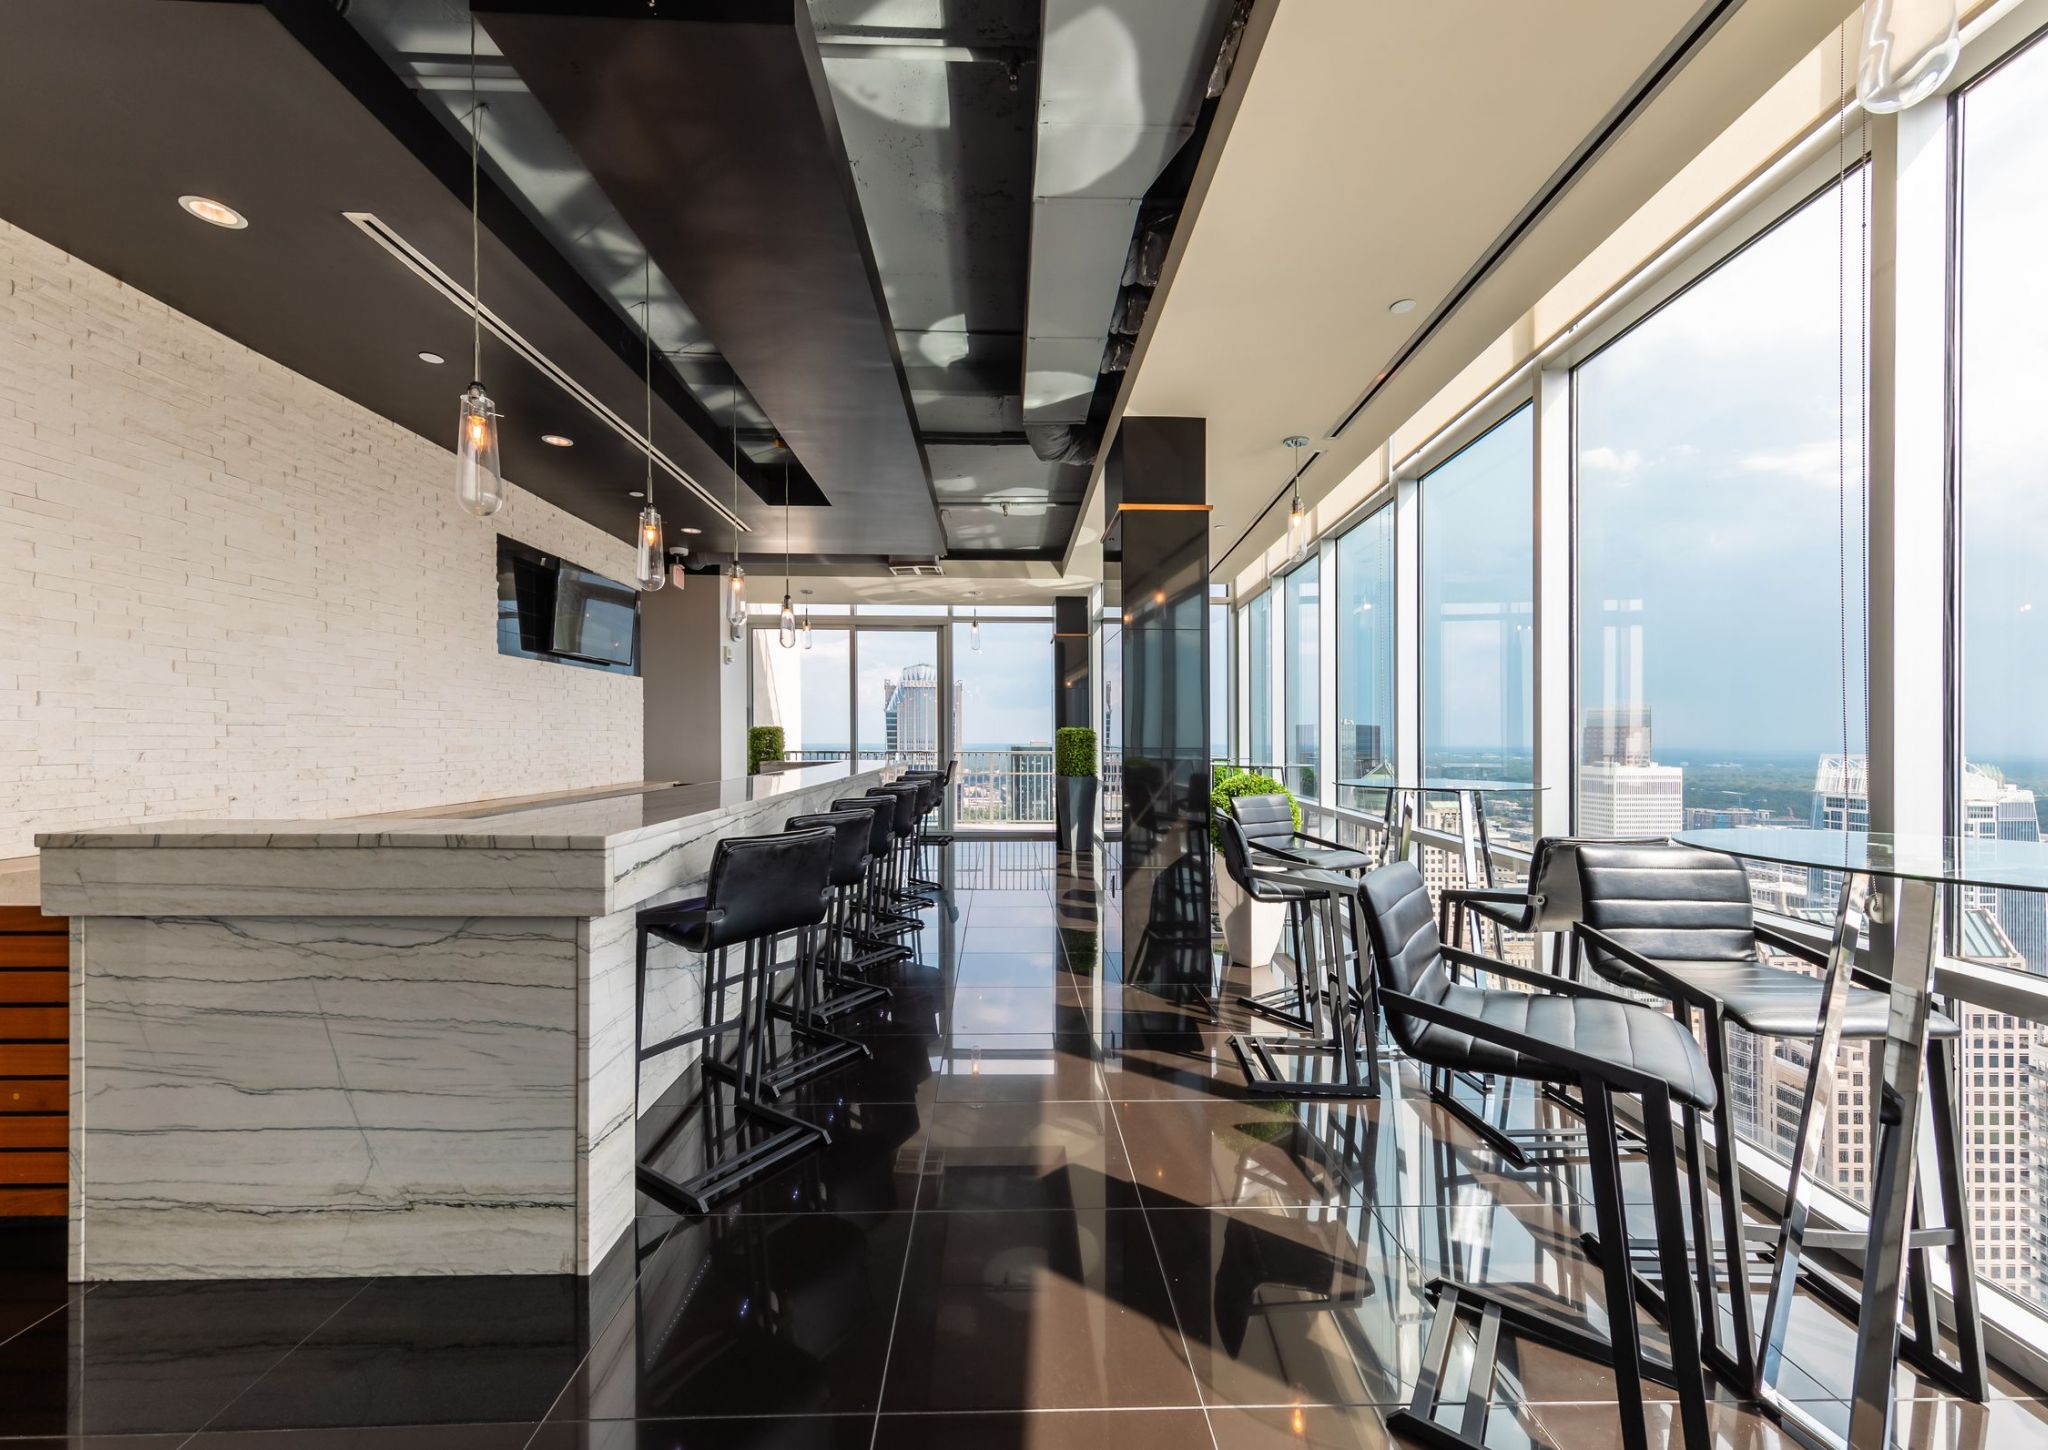 The Vue Charlotte apartments Sky Lounge bar featuring marble countertops, floor-to-ceiling windows and abundant luxury seating